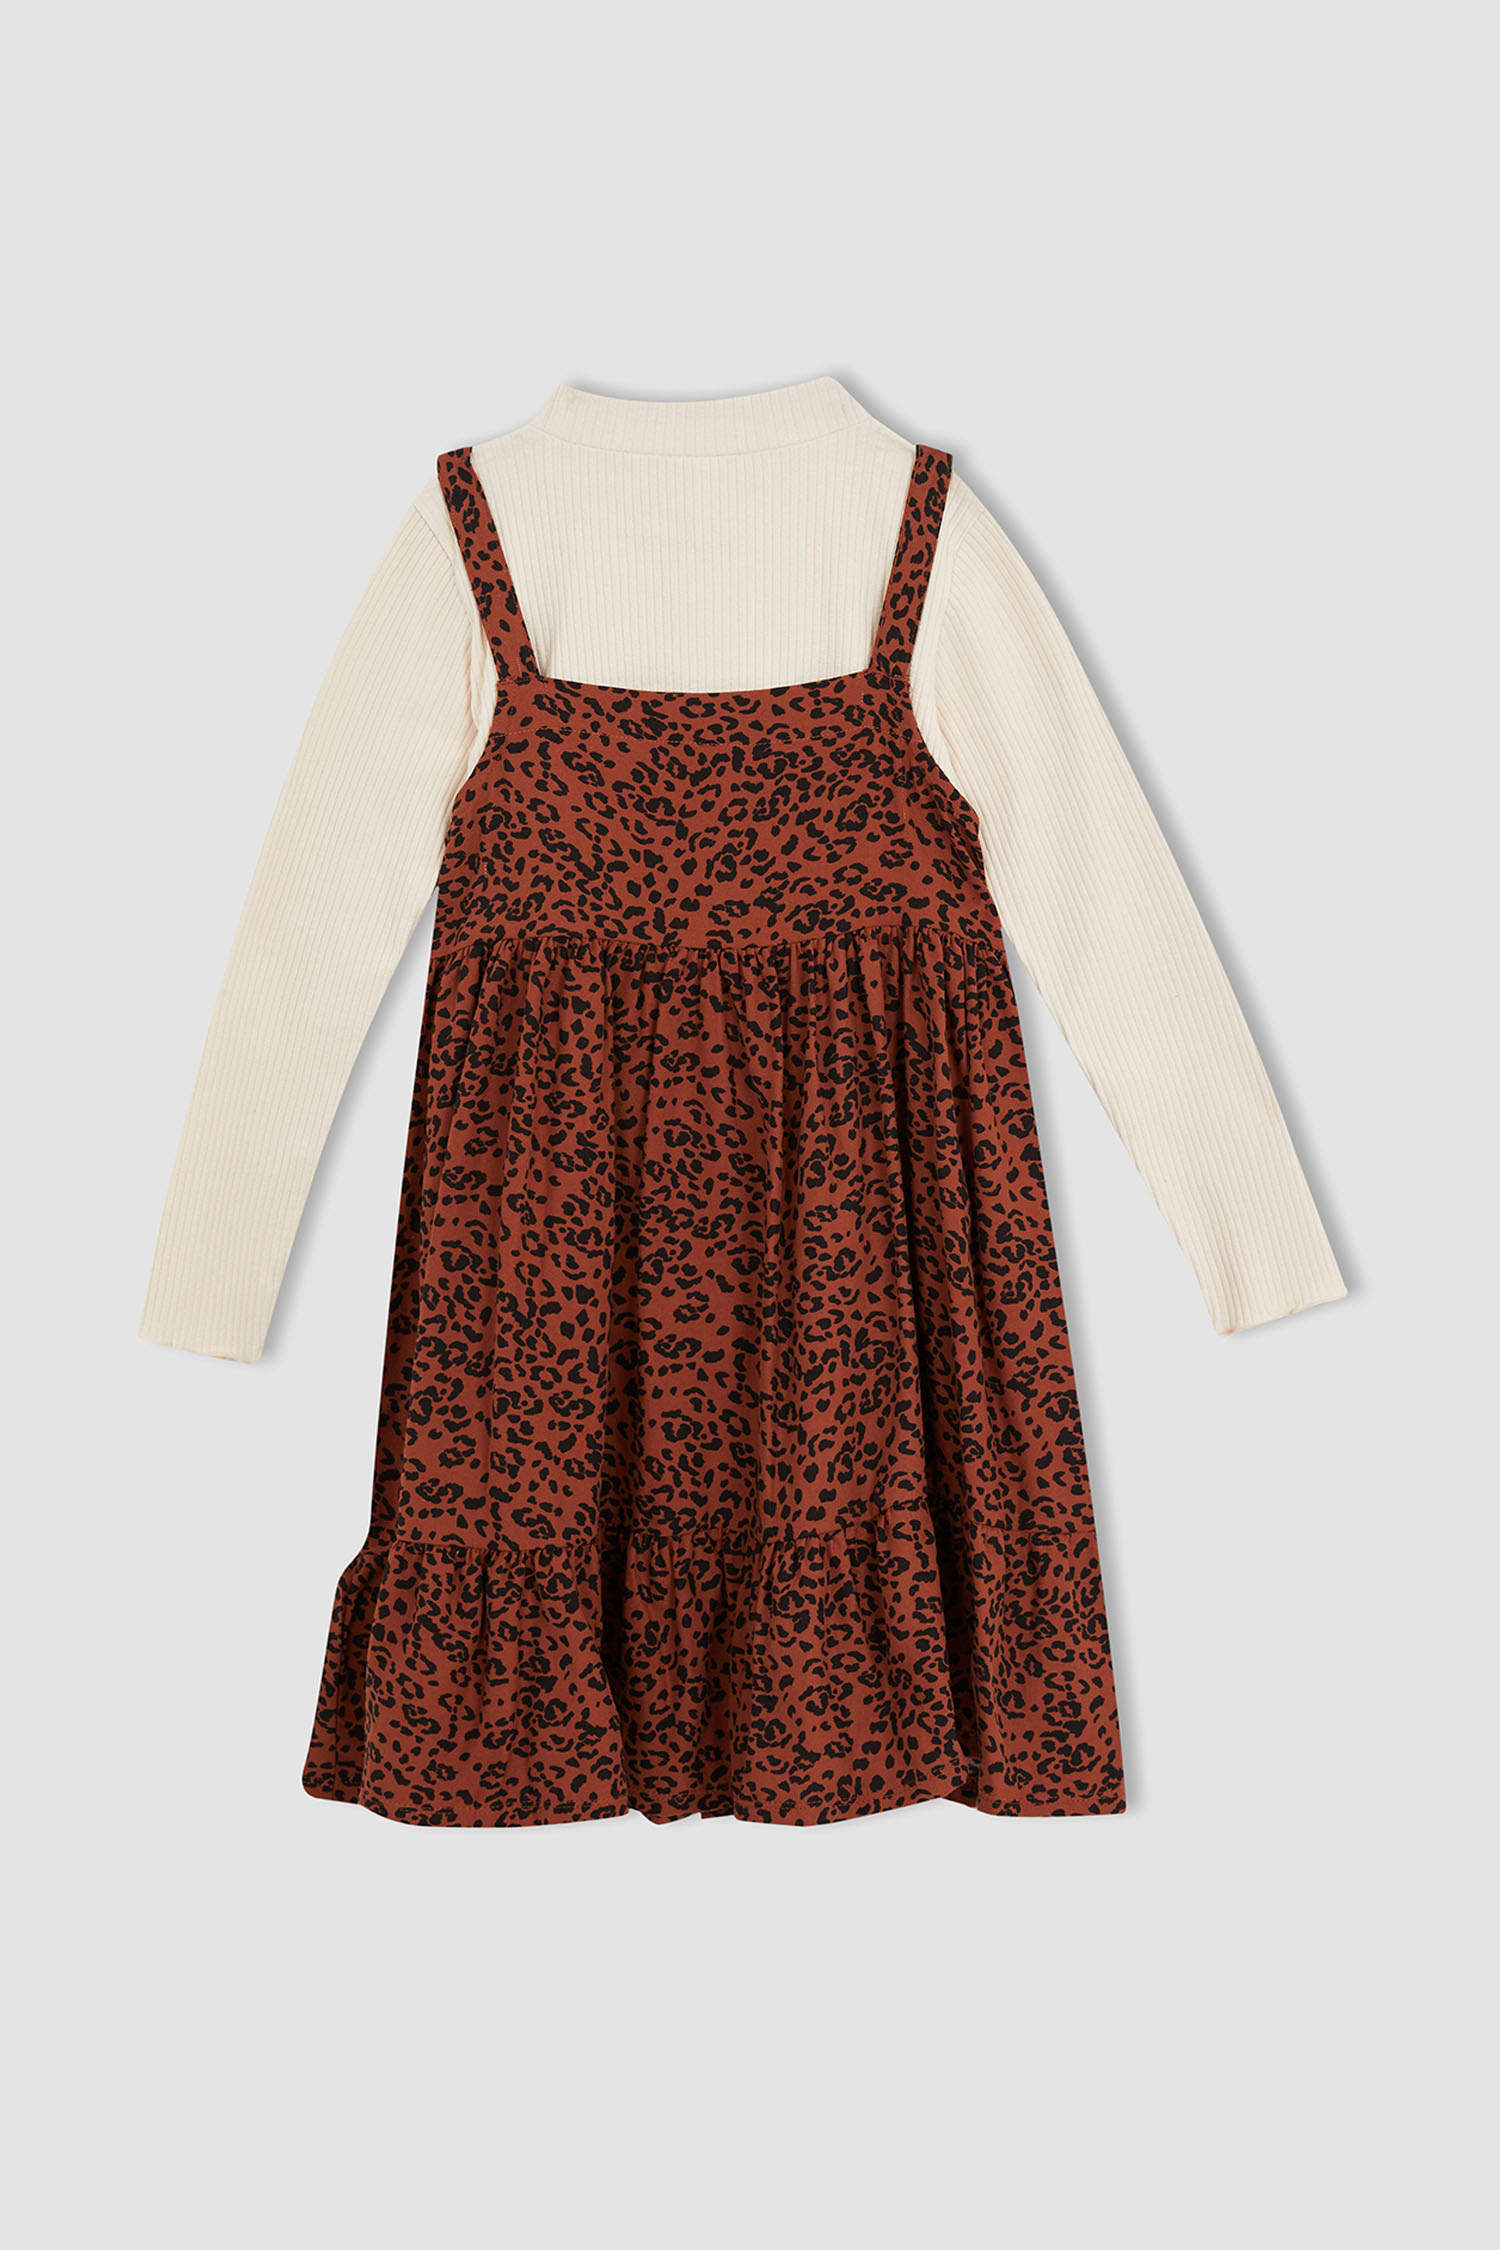 Chicco casual dress KIDS FASHION Dresses Corduroy Red 8Y discount 78% 